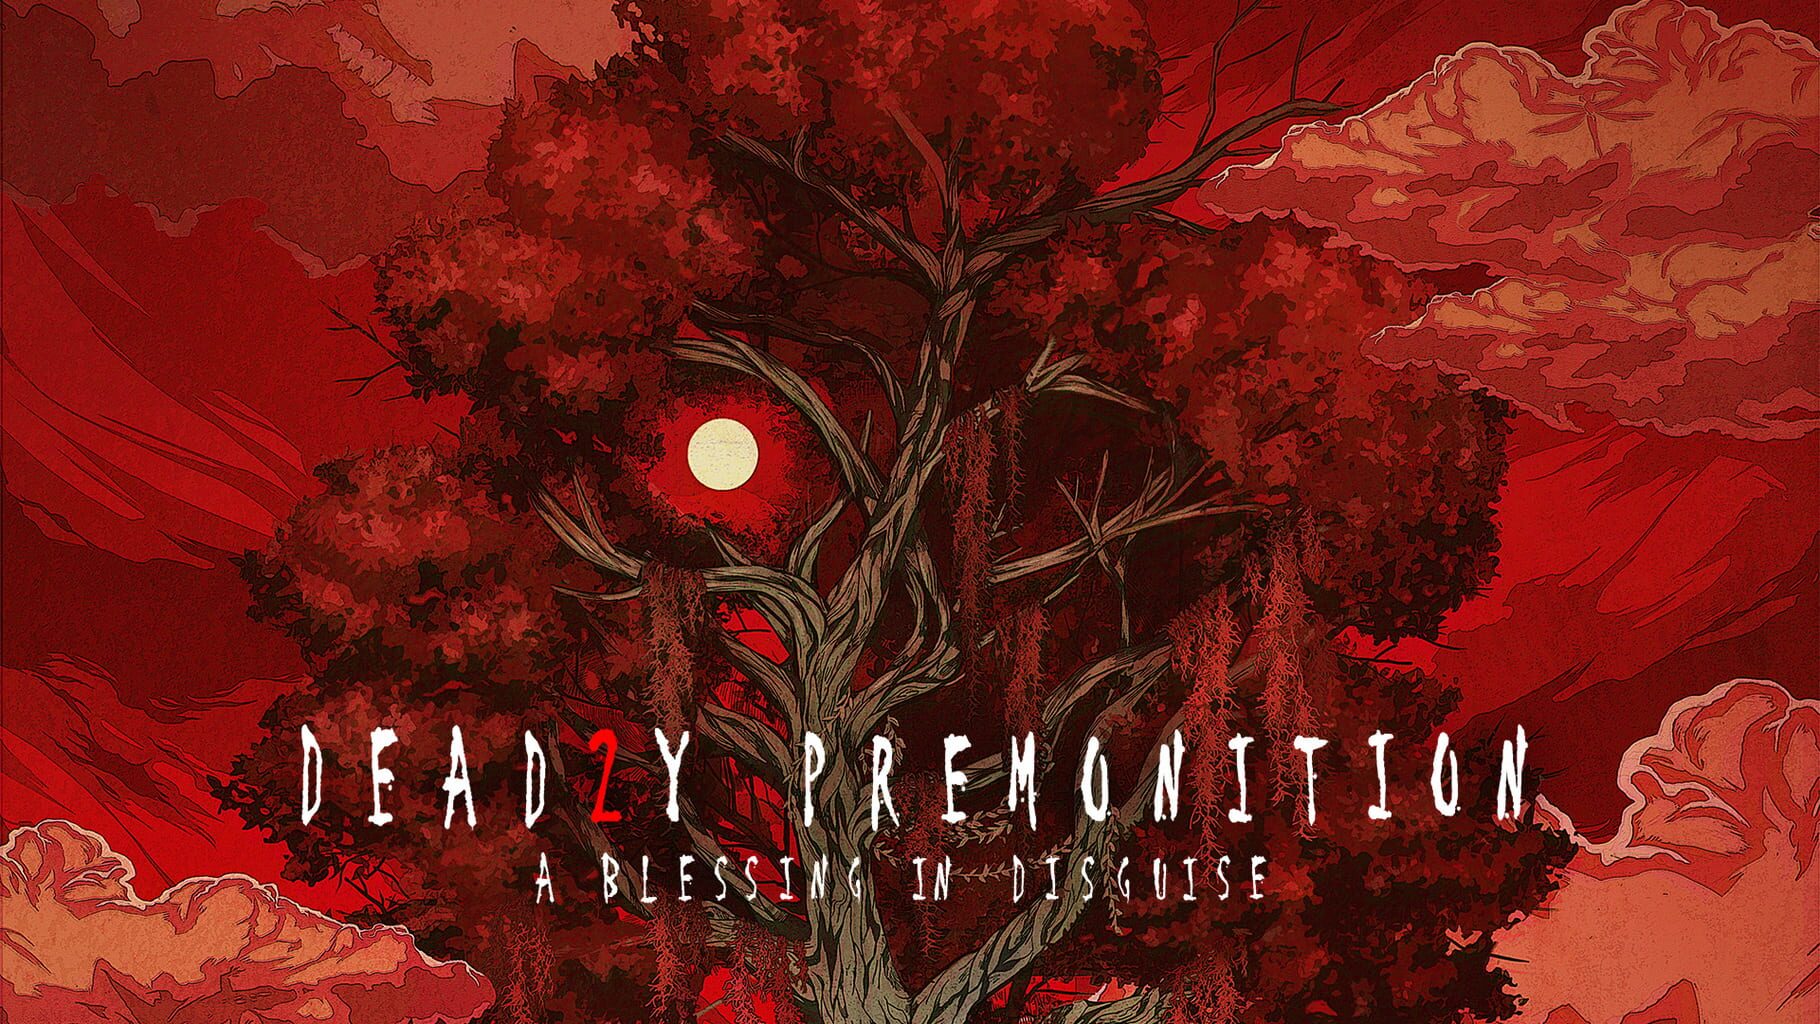 Deadly Premonition 2: A Blessing in Disguise artwork